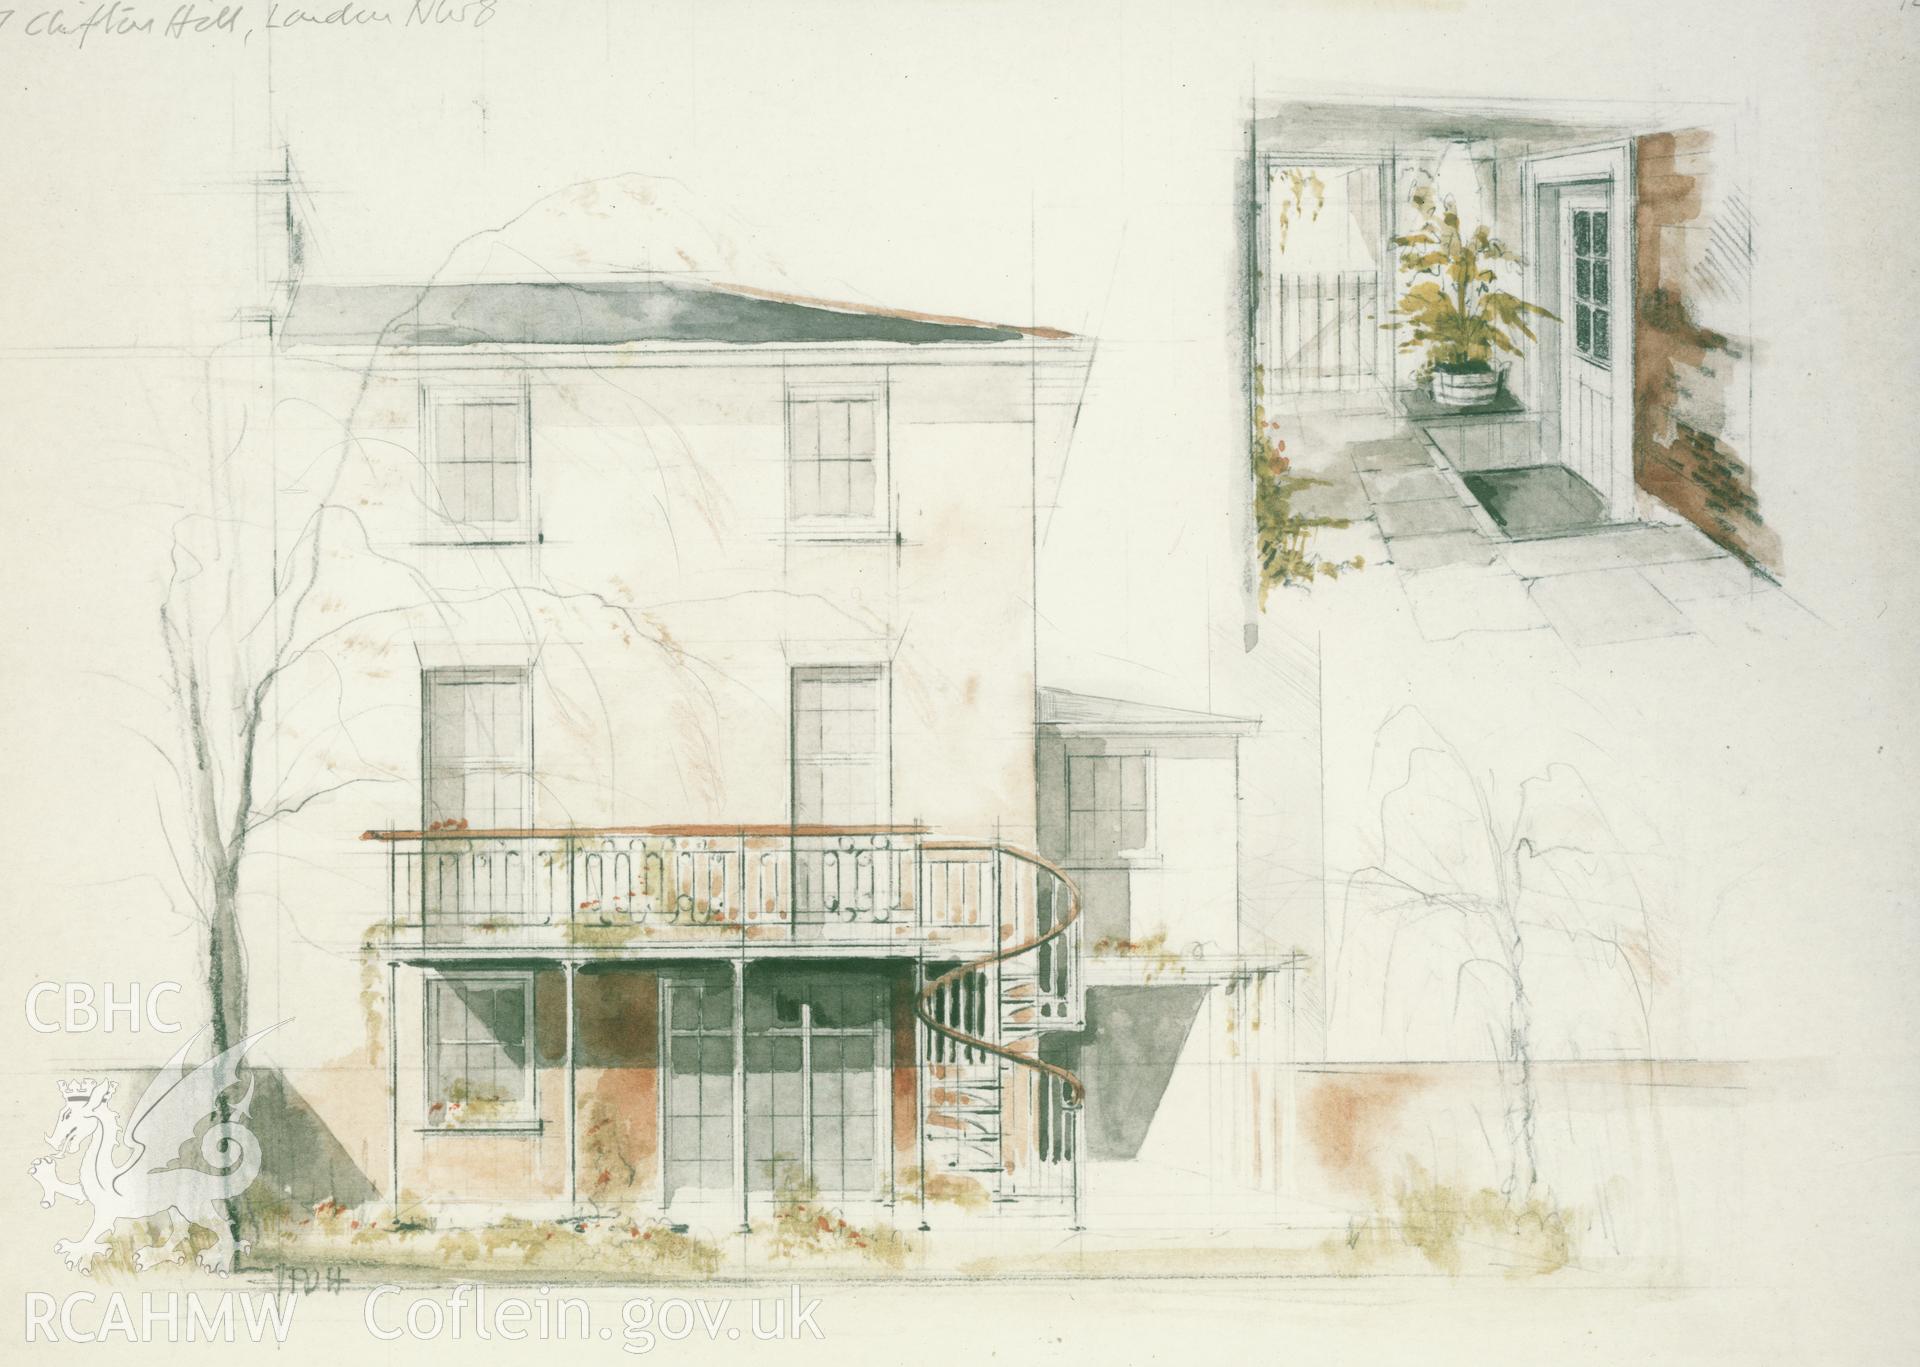 Design Work - Improvements to Houses in Clifton Hill, London: colour copies of originals.